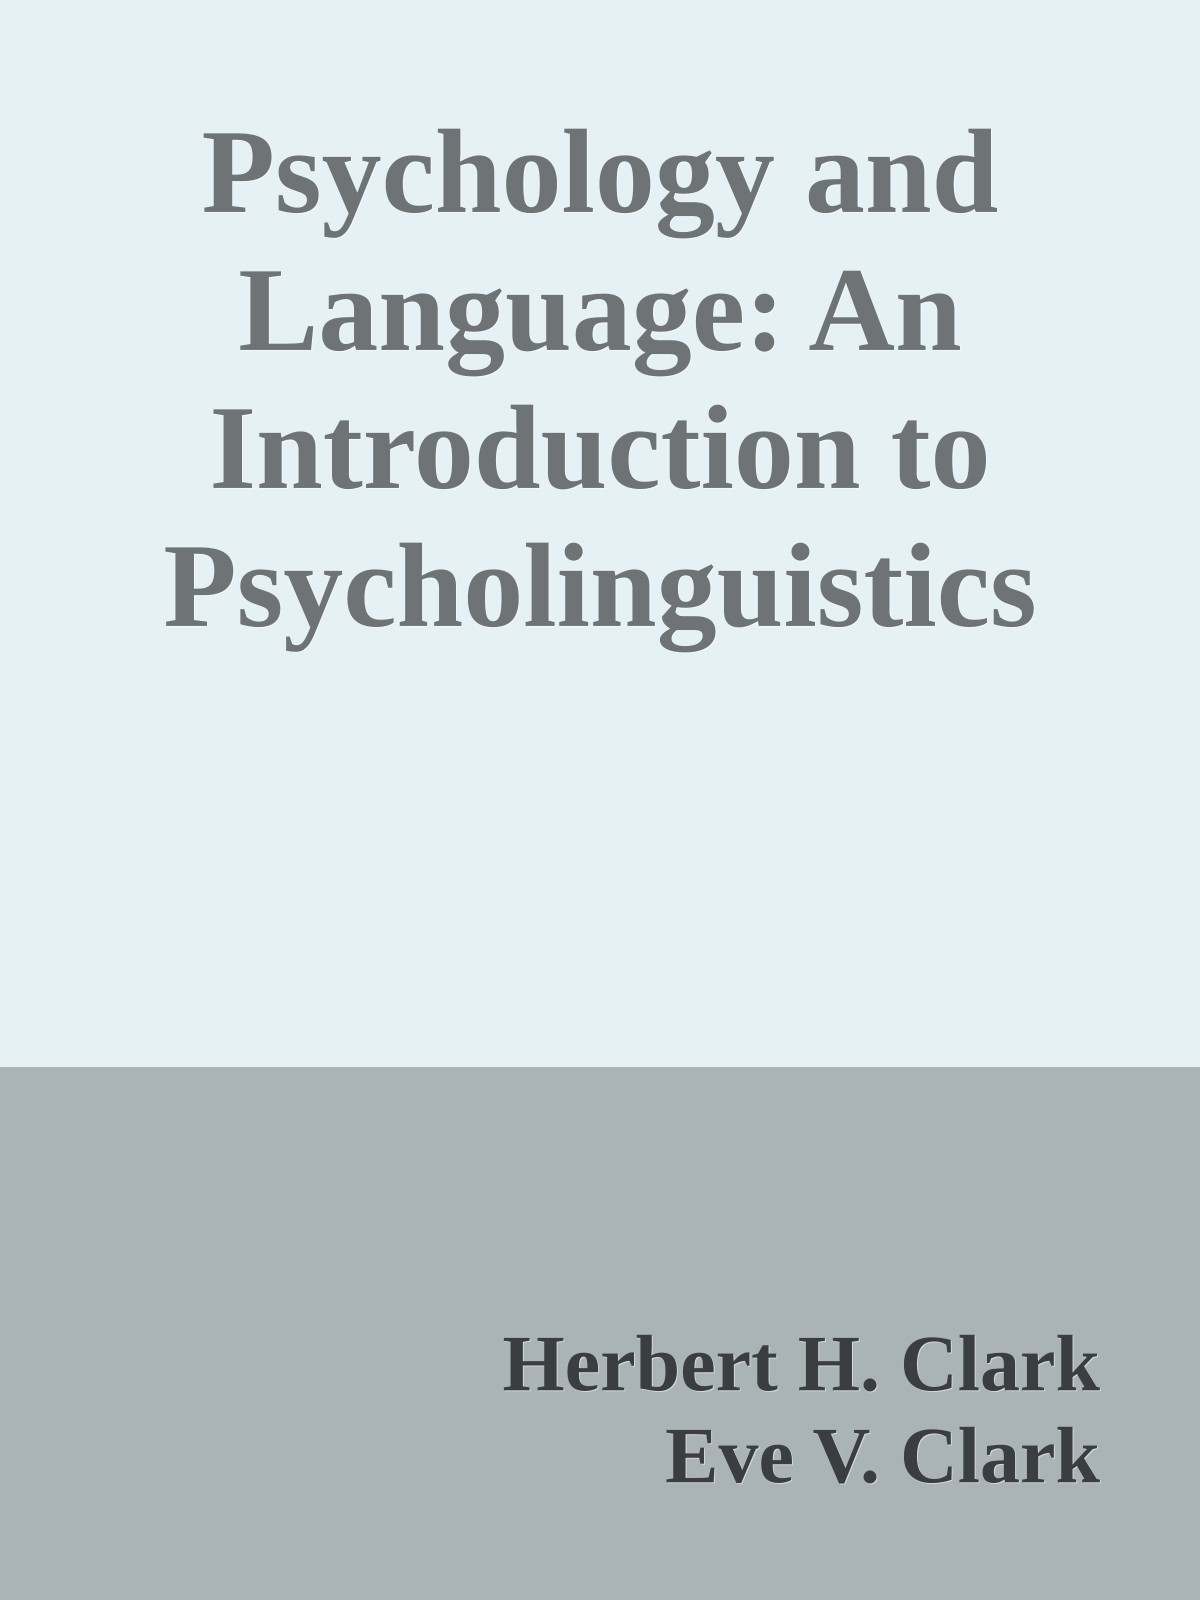 Psychology and Language: An Introduction to Psycholinguistics